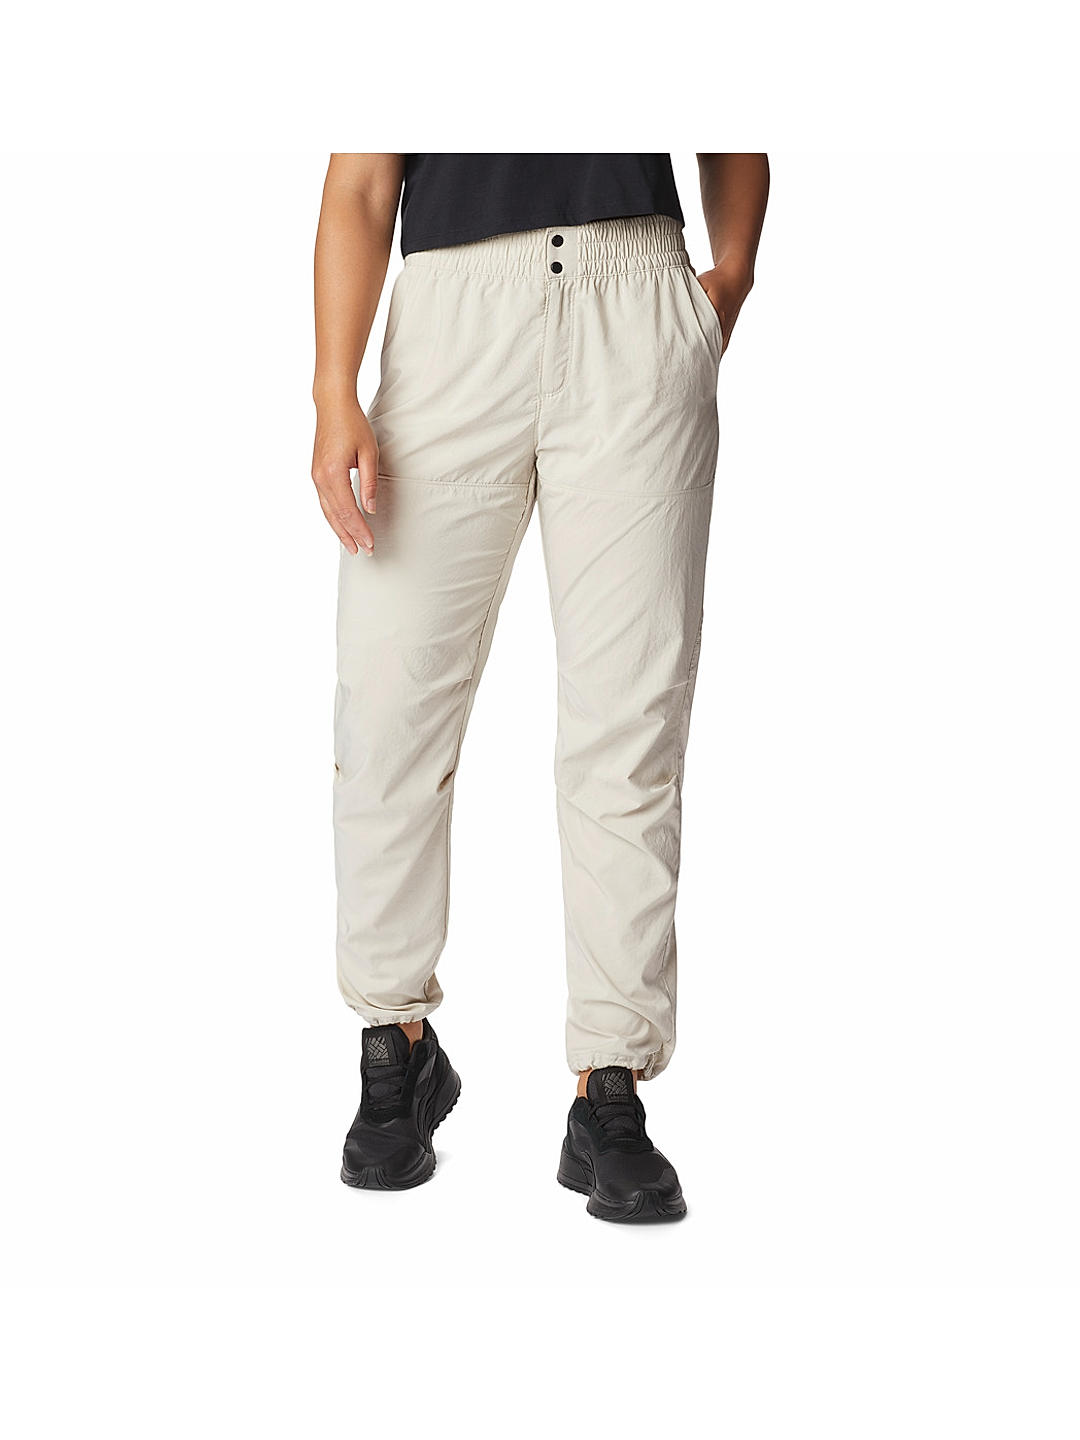 Crownly Track Pant Black with side zipper at Rs 449.00 | Bengaluru| ID:  2851568725930